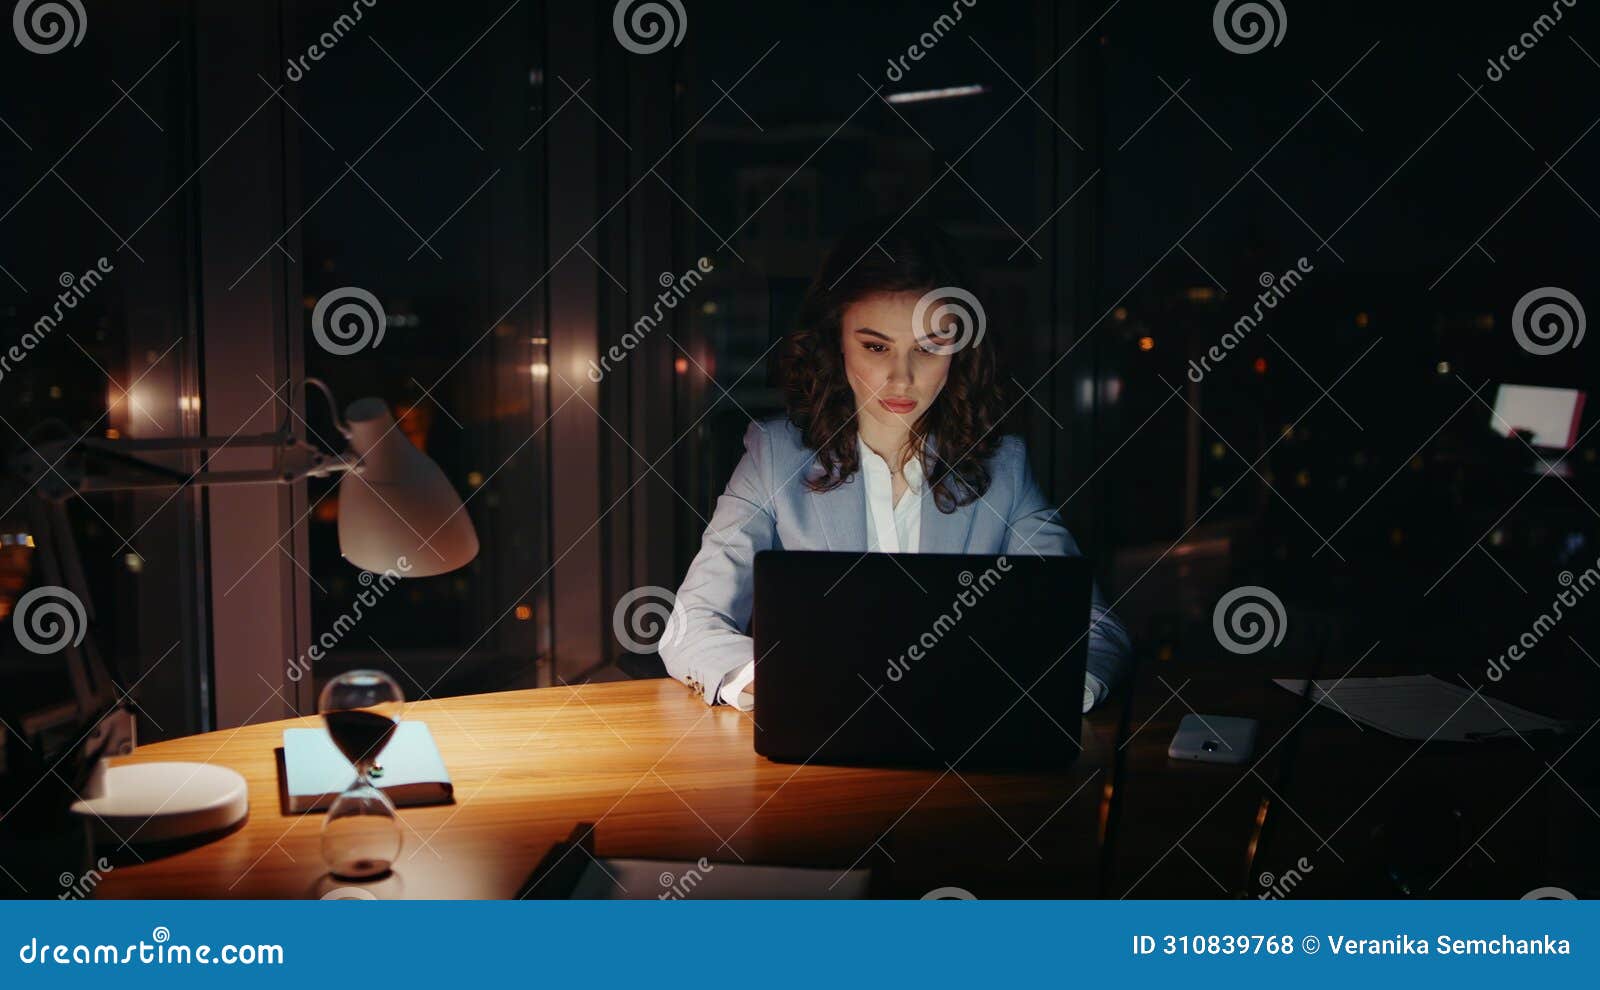 overburdened woman working office closing tired eyes looking laptop at night.